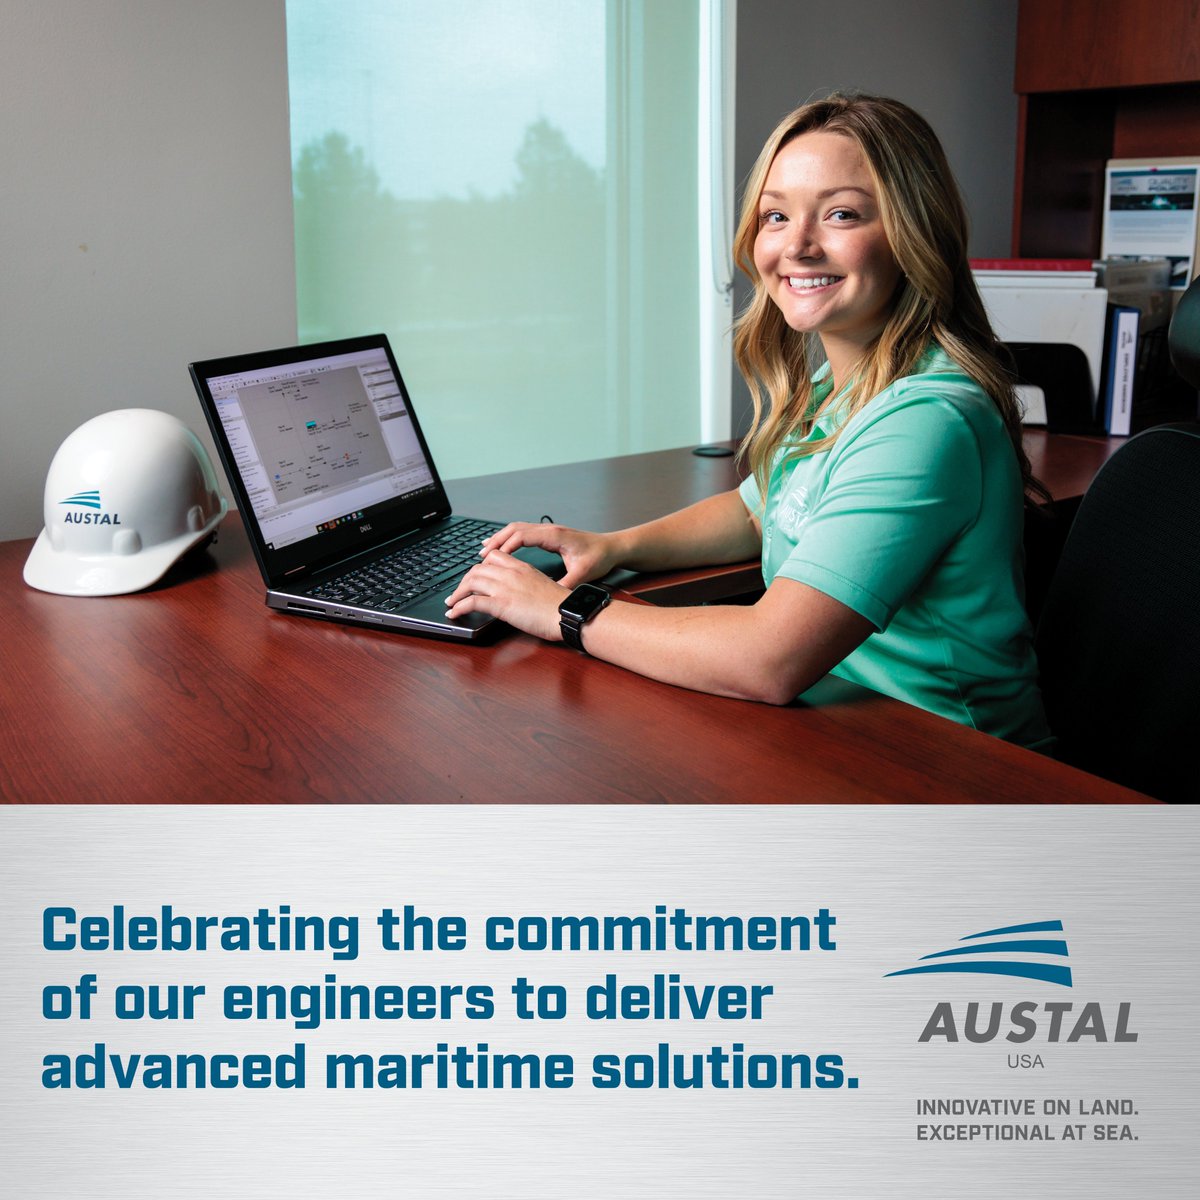 National Engineers Week not only promotes the importance of careers in science, technology, engineering, & math, but also celebrates the influential work of engineers. Thank you to our engineers & engineering staff for your dedication & valuable contributions to Austal USA.